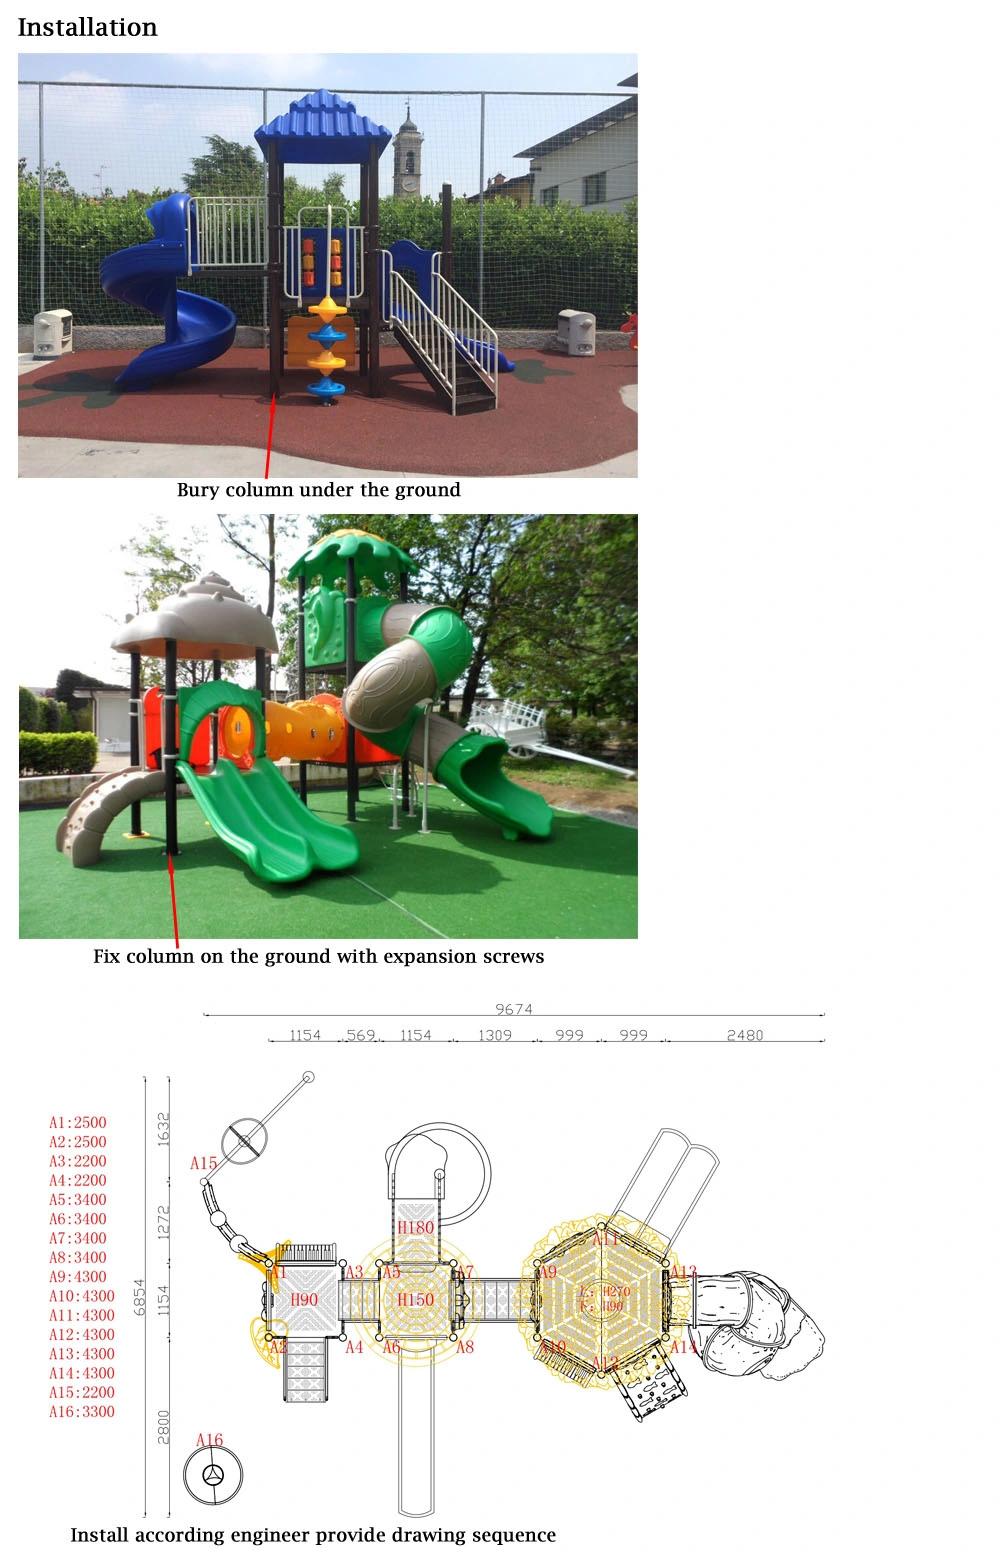 Mich Custom Quality Assured Small Children Outdoor Playset with Money Bars